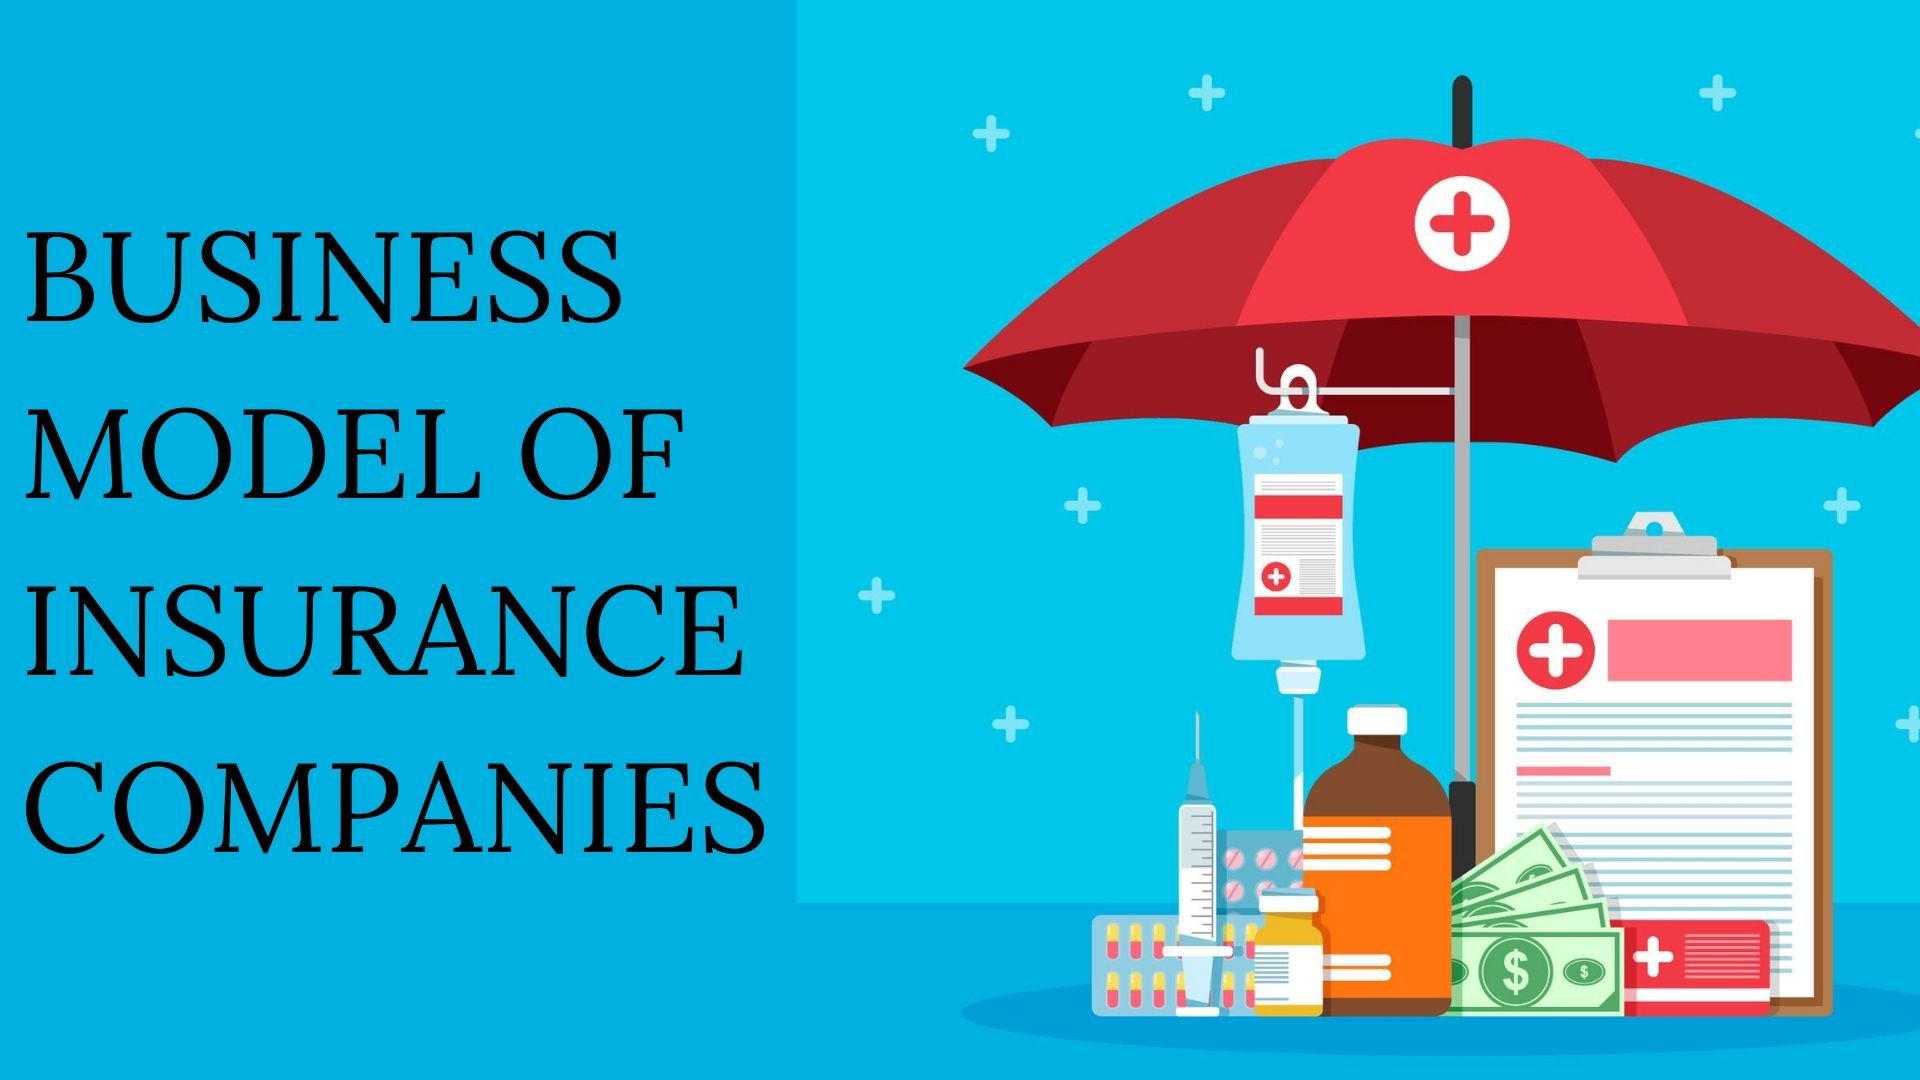 What is the Main Business Model of Insurance Companies? | Marketing91